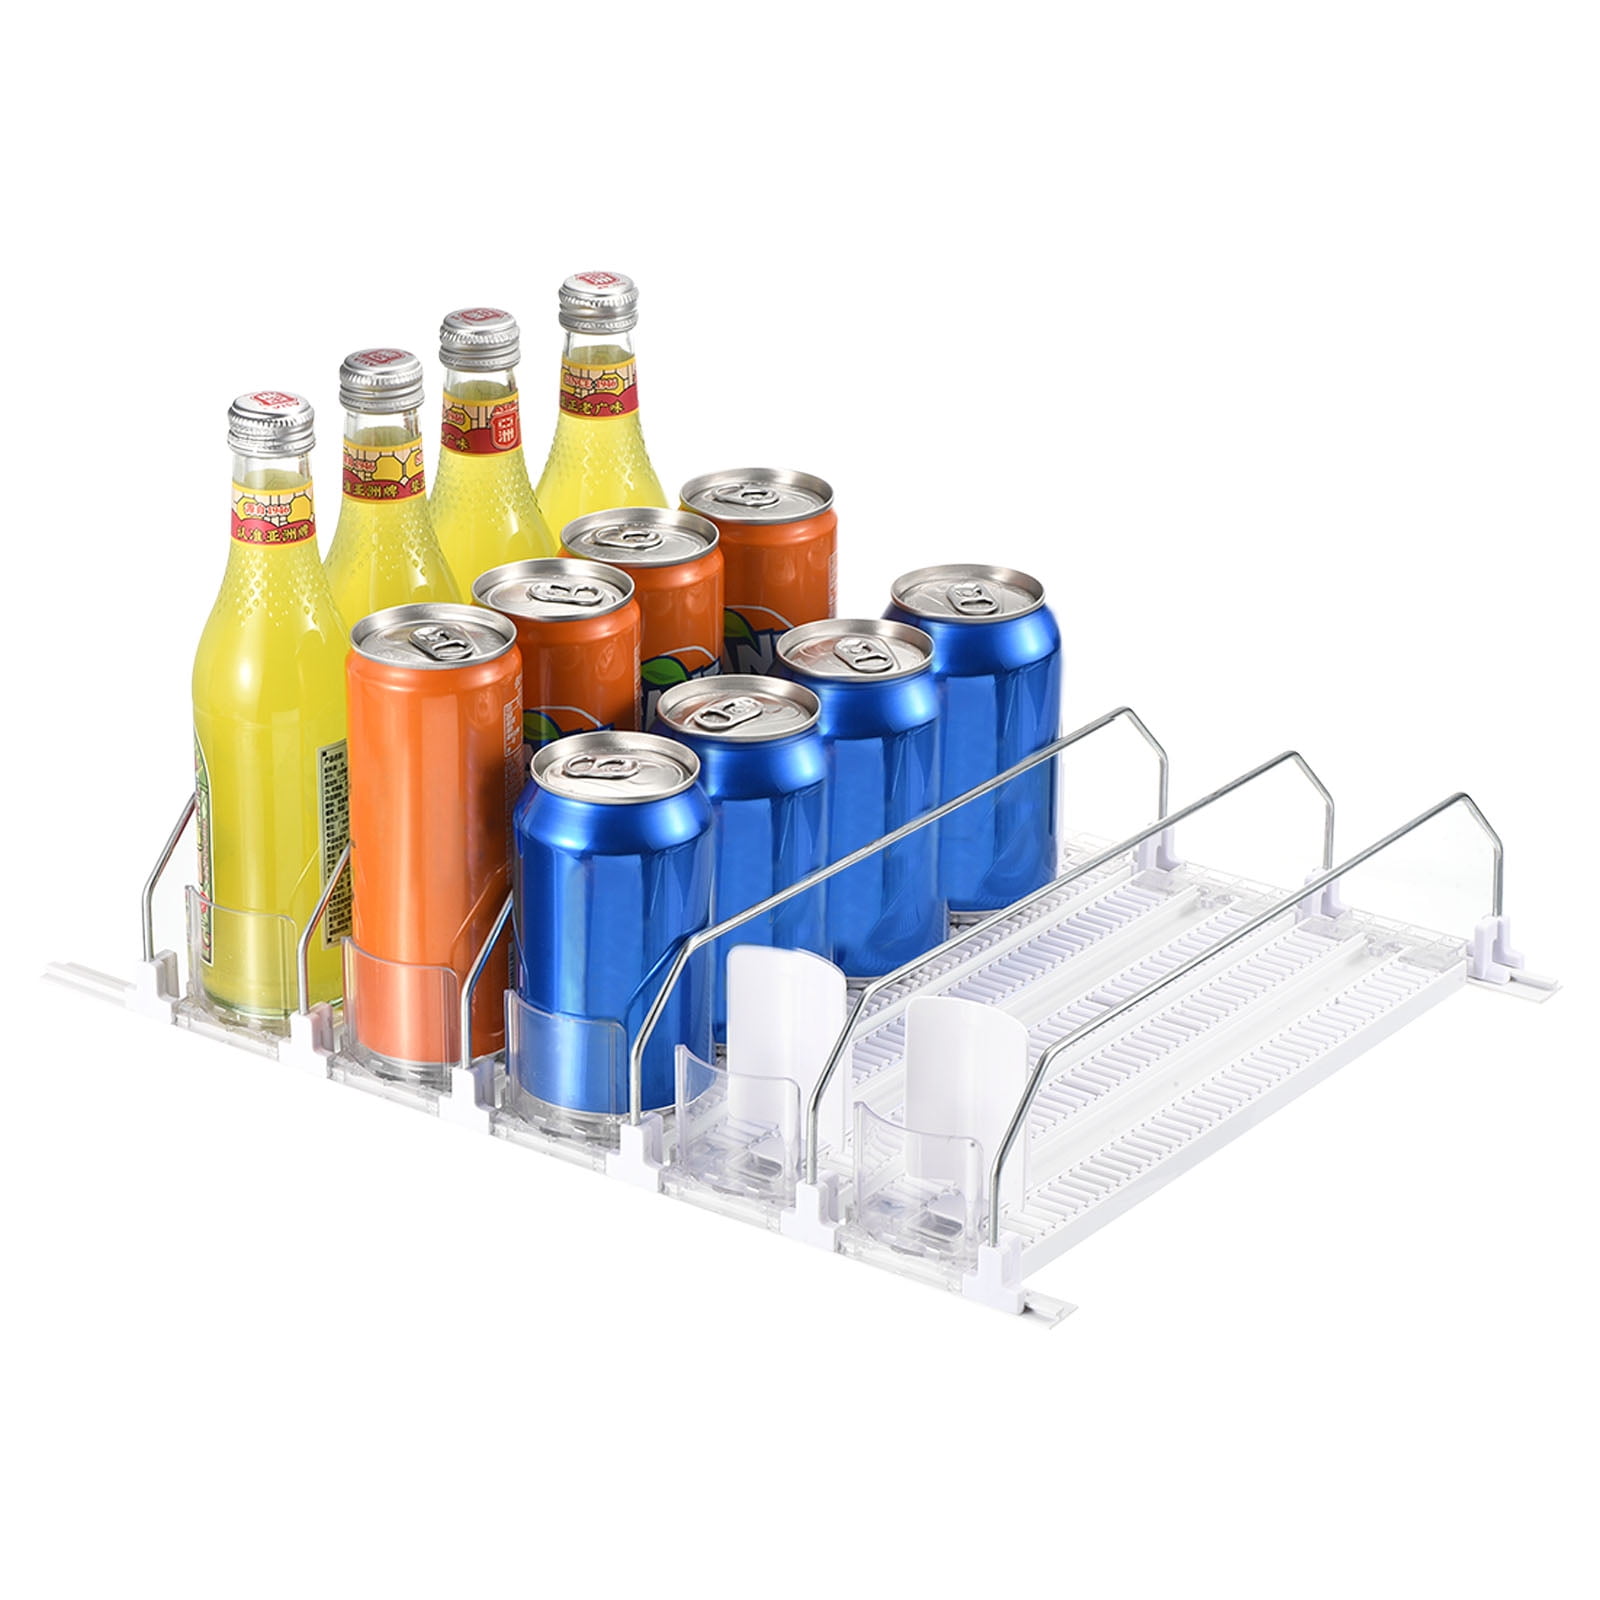 Drink Organizer for Fridge, Soda Can Dispenser for Refrigerator, Automatic  Self-Pushing Fridge Drink Dispenser Holds up to 15 Cans, 3 Row